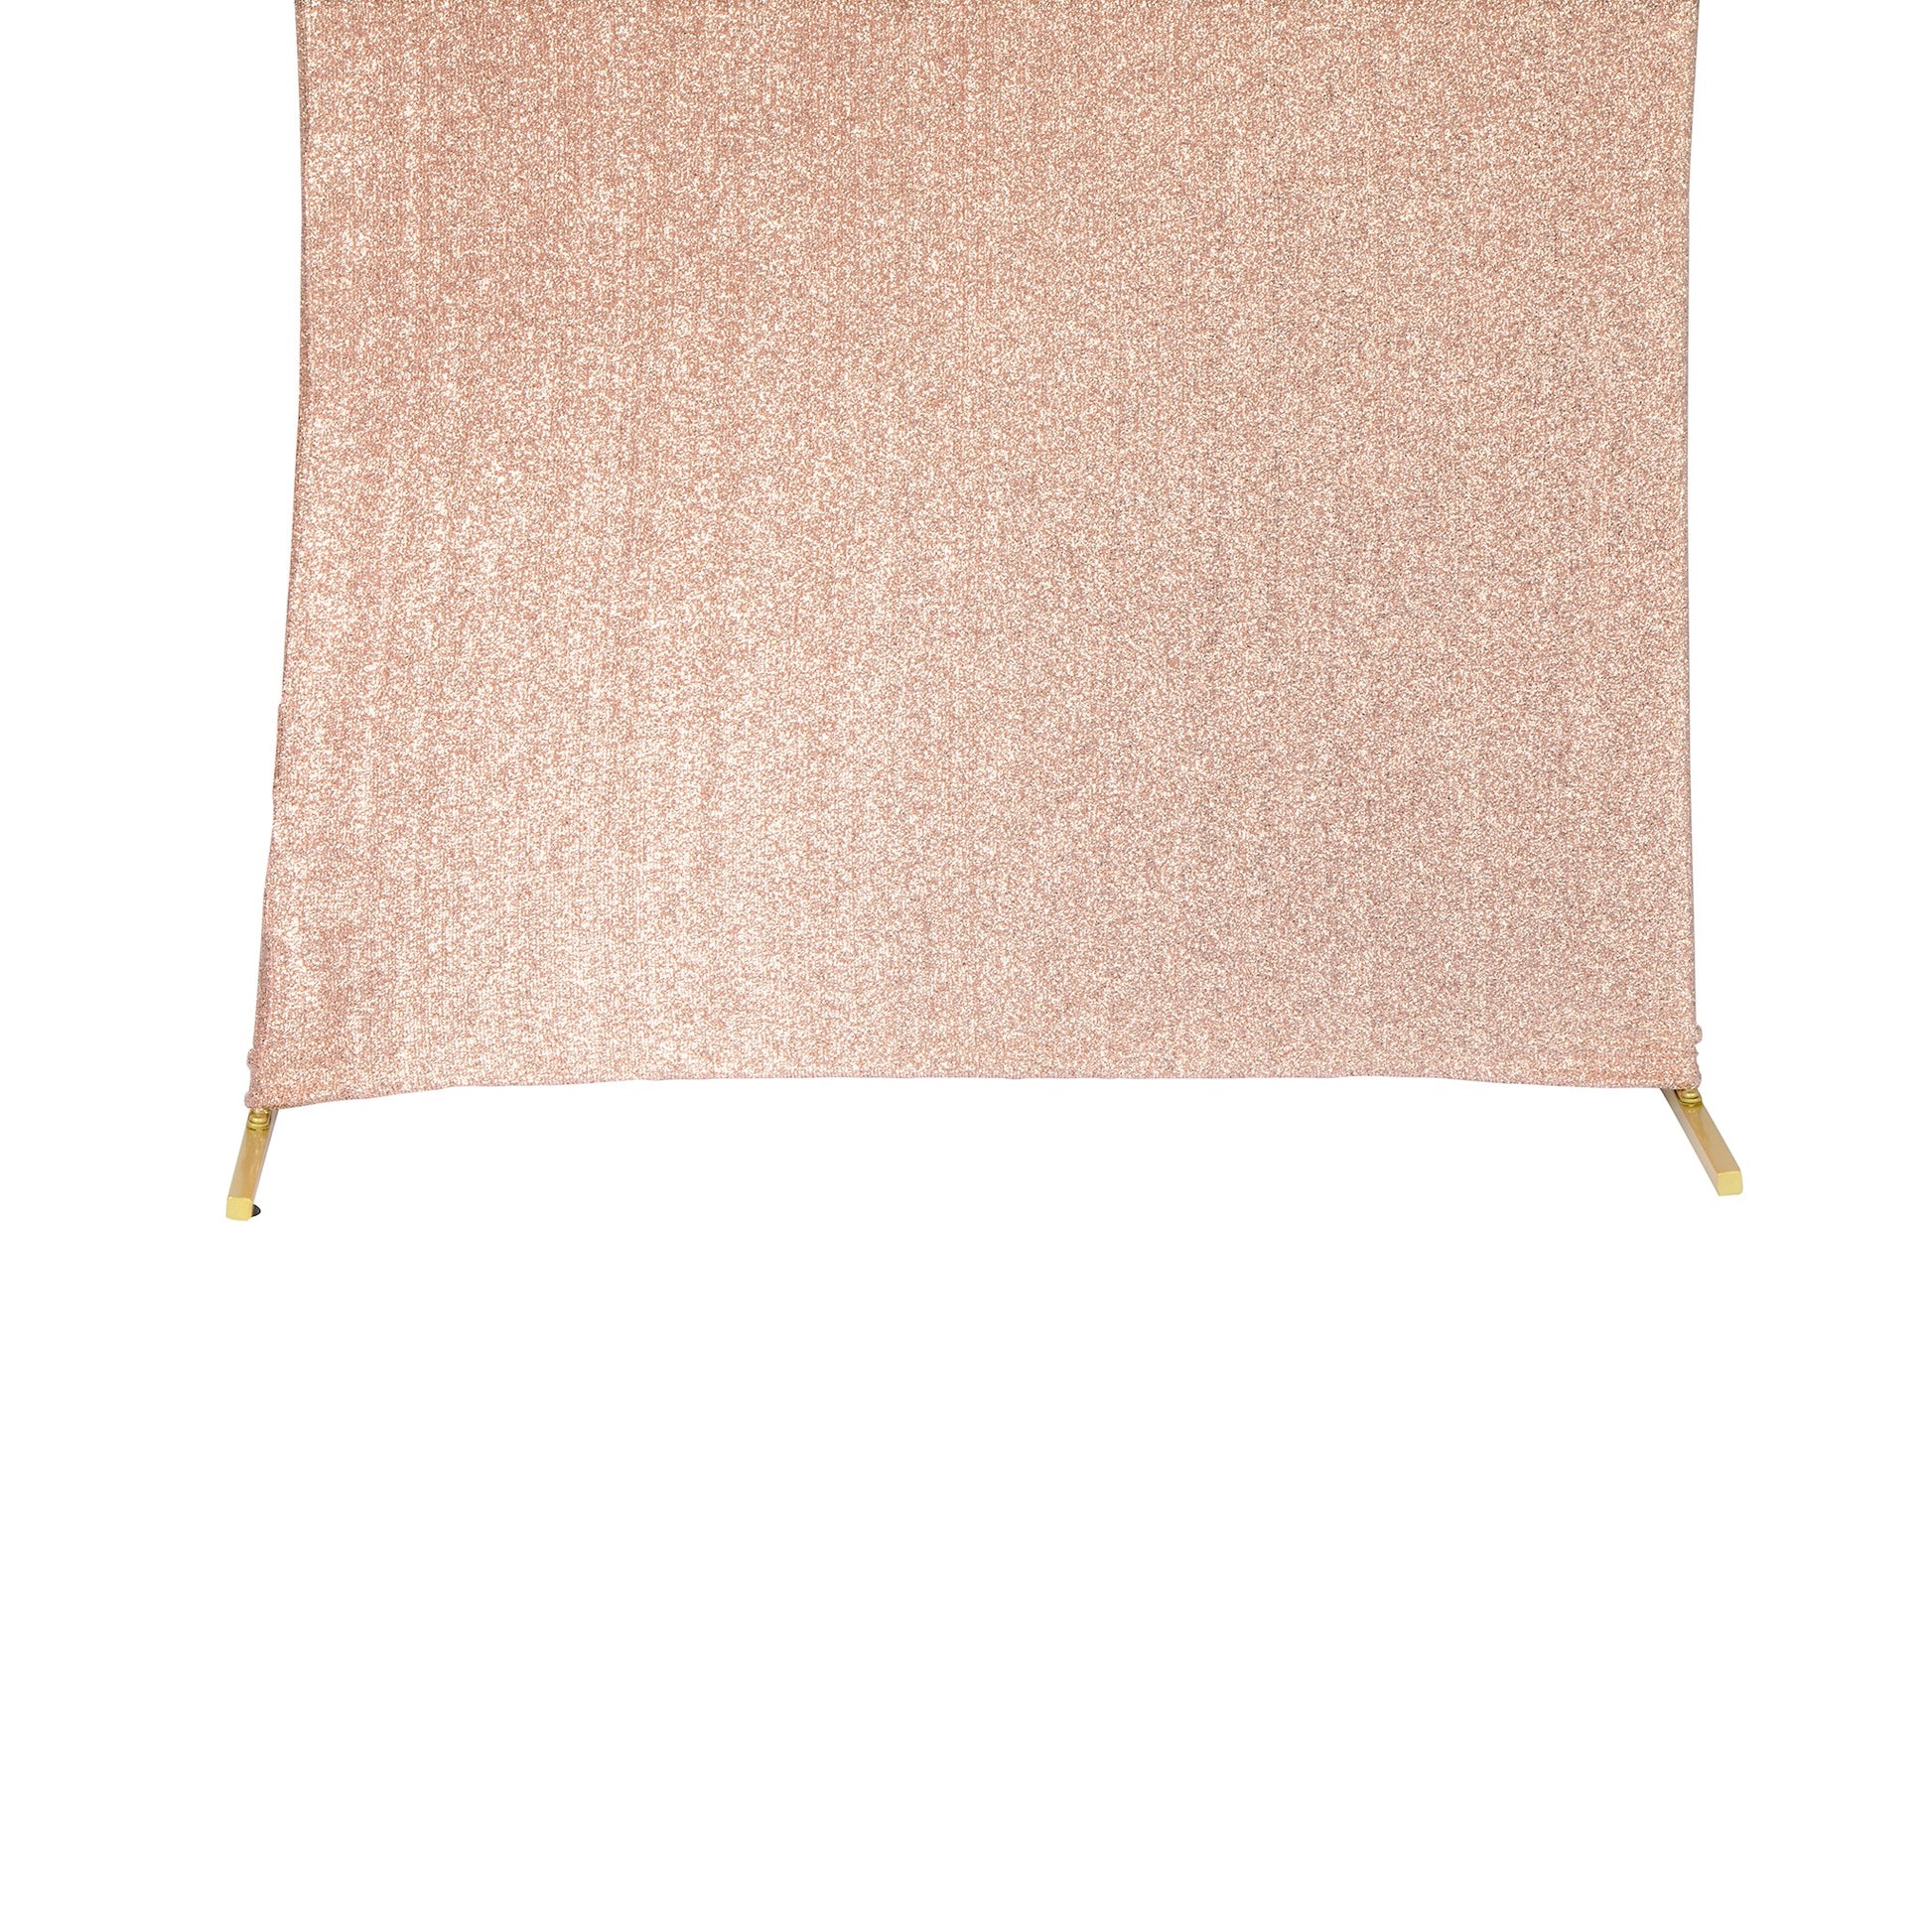 Shimmer Spandex Arch Covers for Chiara Frame Backdrop 3pc/set - Blush/Rose Gold